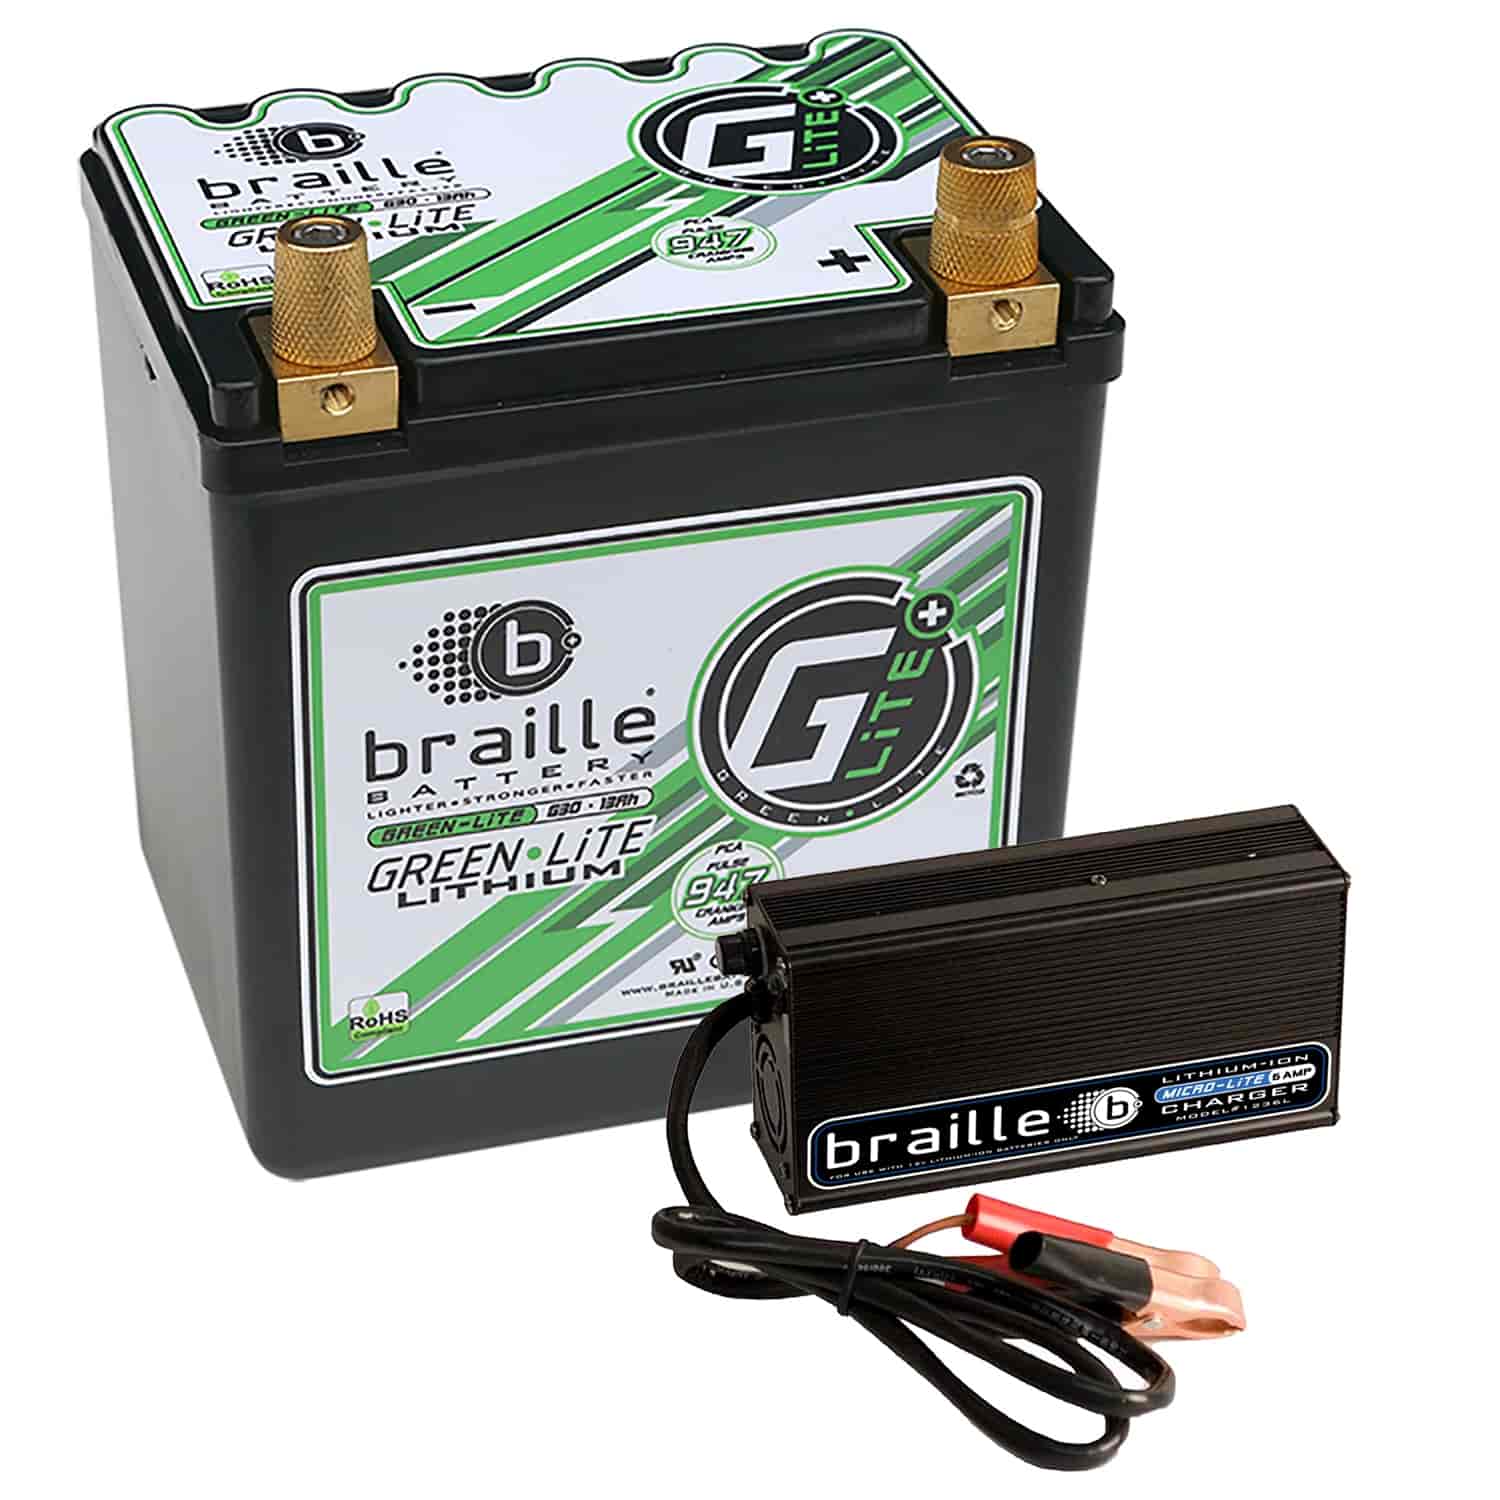 Green-Lite Lithium Ion 6-Volt Automotive Battery and Charger Combo